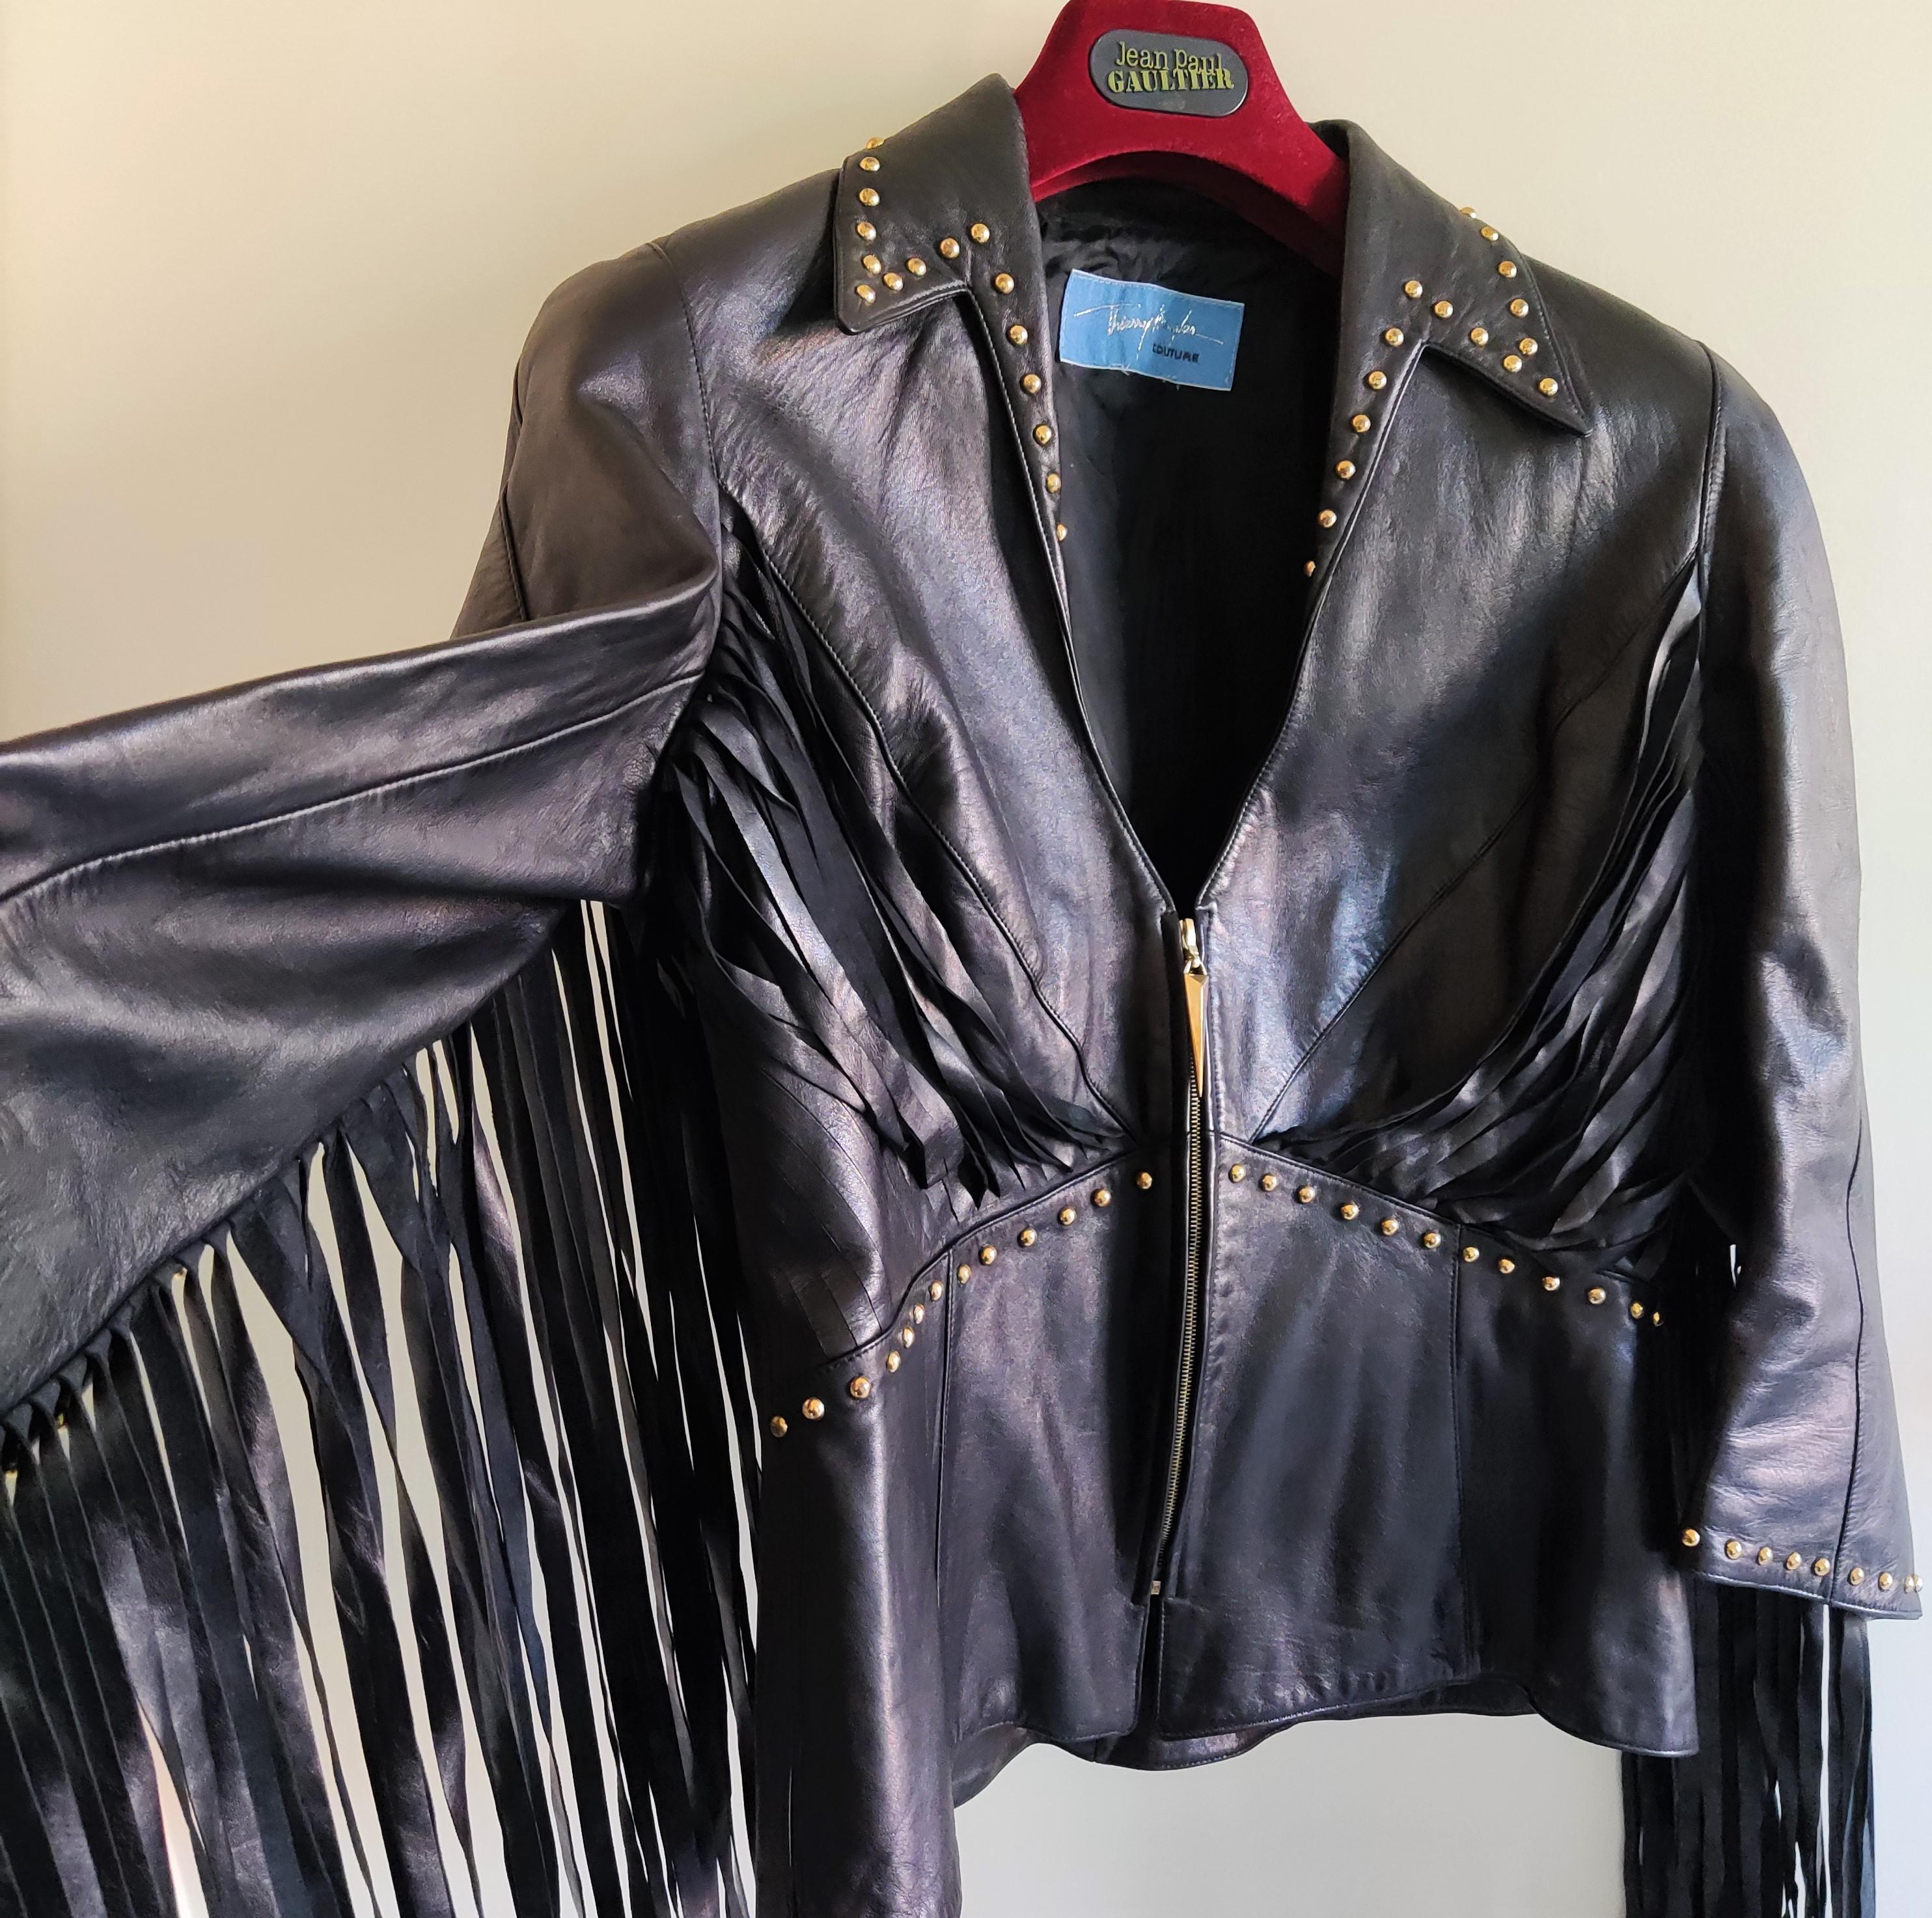 Beautiful motorcycle couture piece by Thierry Mugler!
Leather lamb.
Riveted.
Wasp Waist.
Tassels on the sleeves!

Very good condition!

Size: Medium.
Please, check the measurements.
Length: 55 cm / 21.6 inch
Armpit to armpit: 47 cm / 18.5